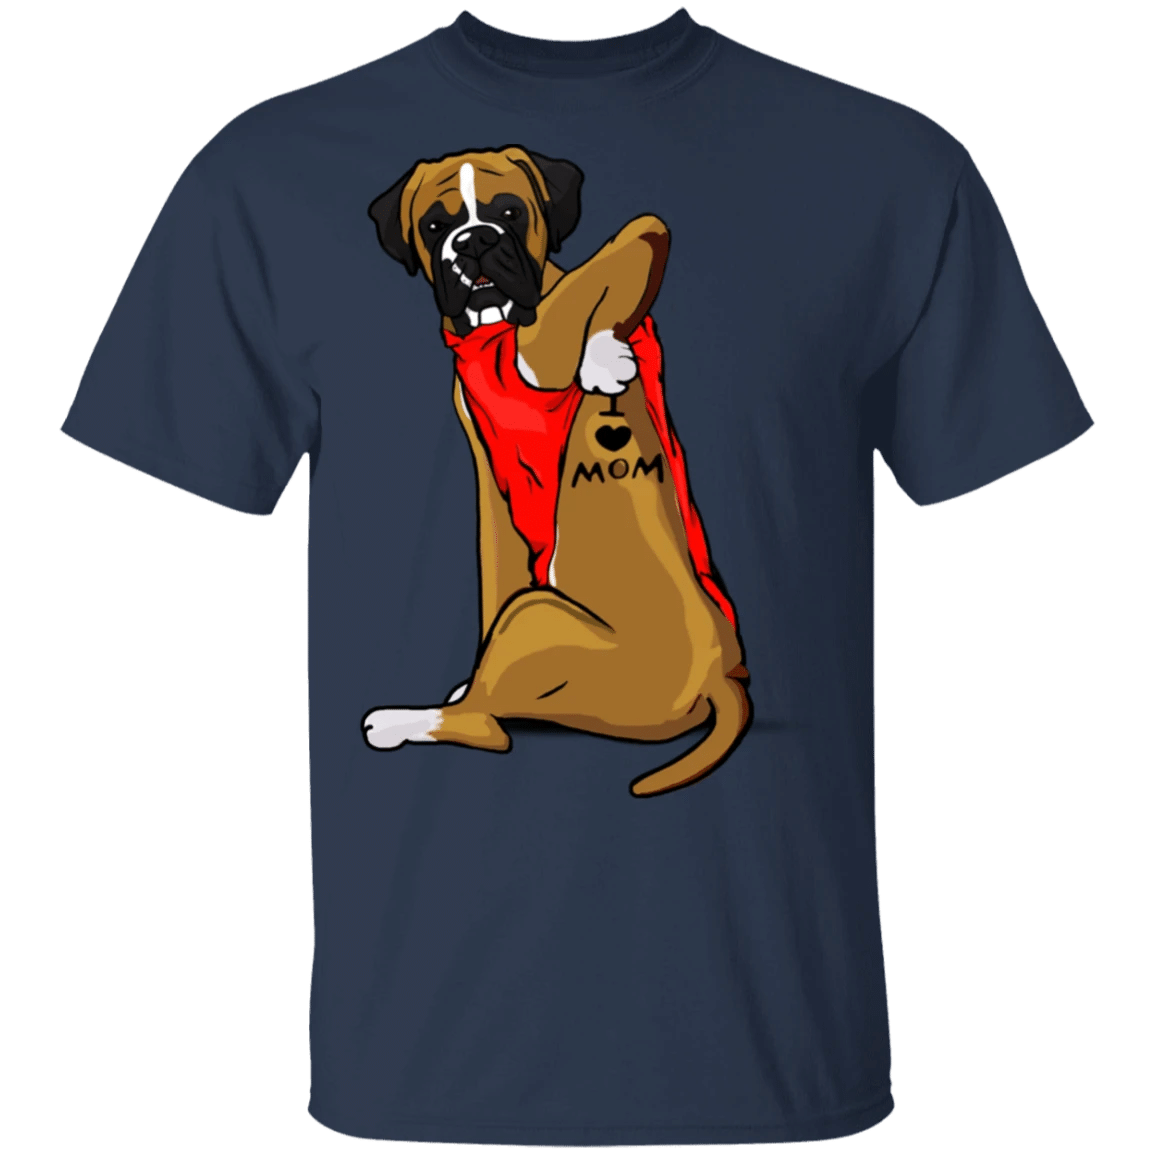 Boxer Tattoo I Love Mom Cute Dog Shirt Mother's Day Gift